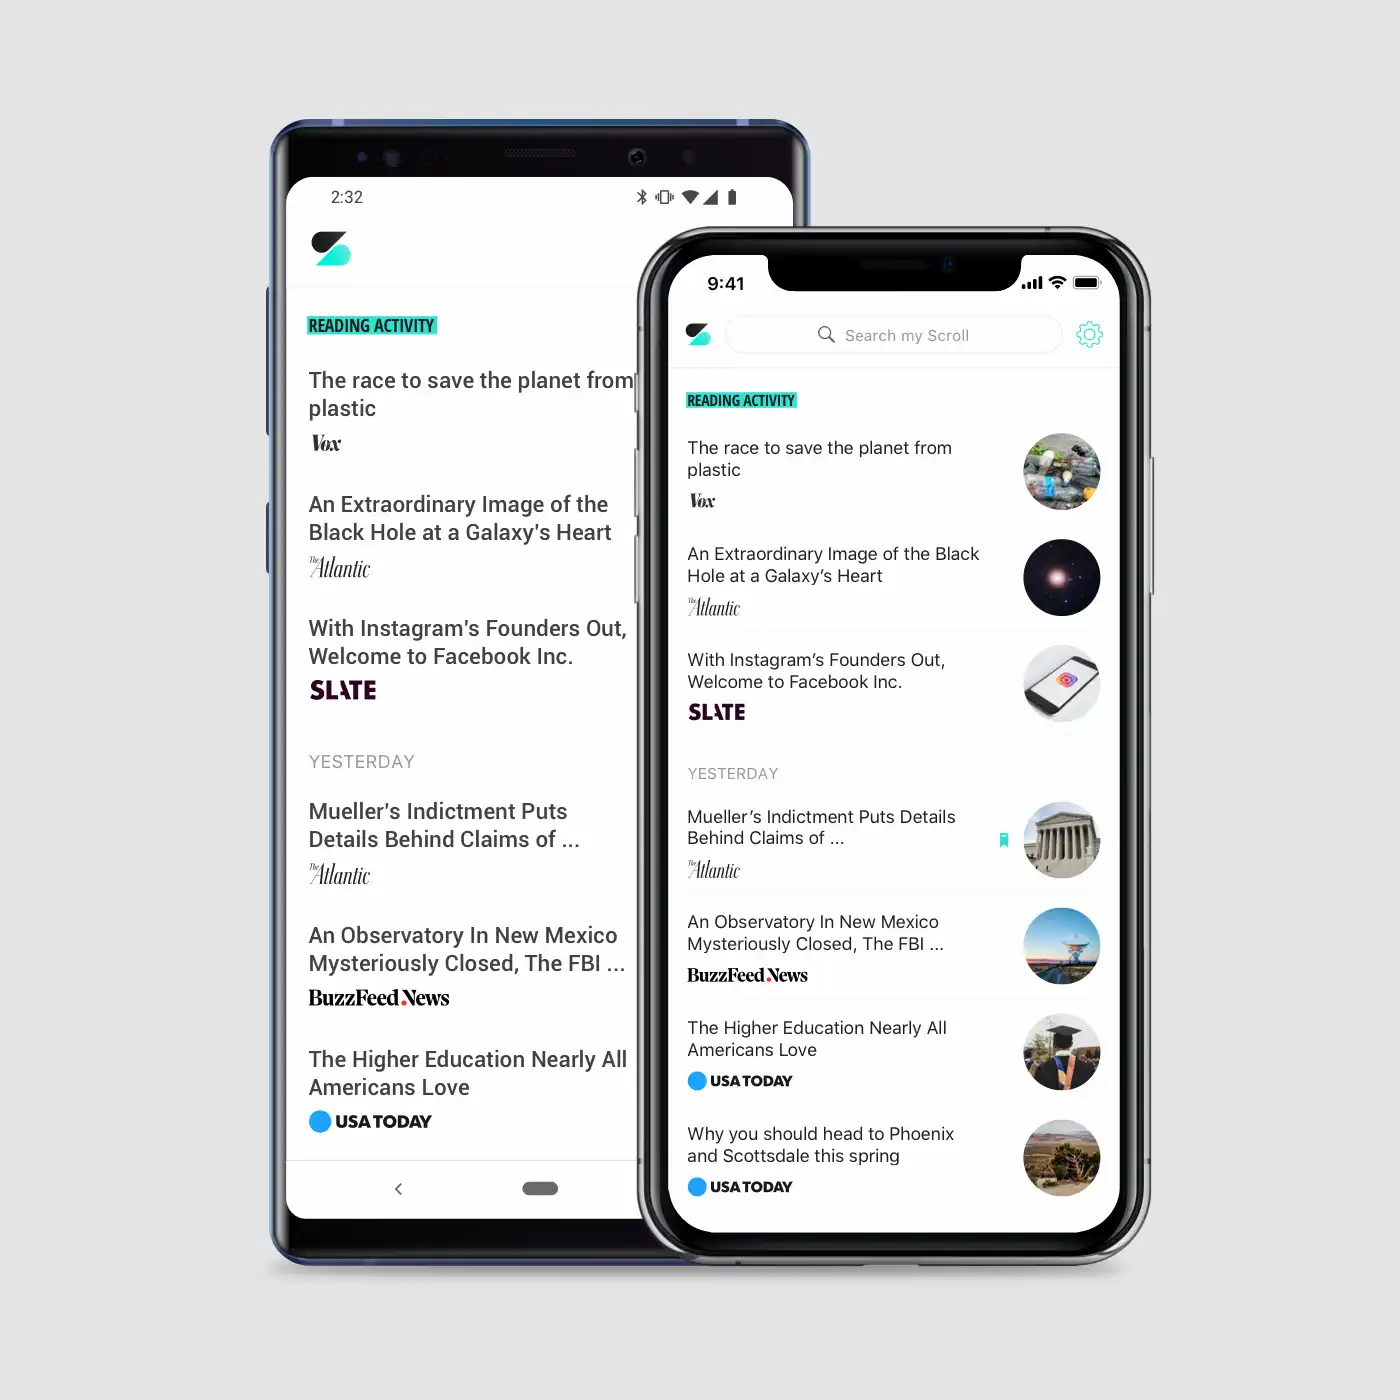 An image of the Scroll Reader App